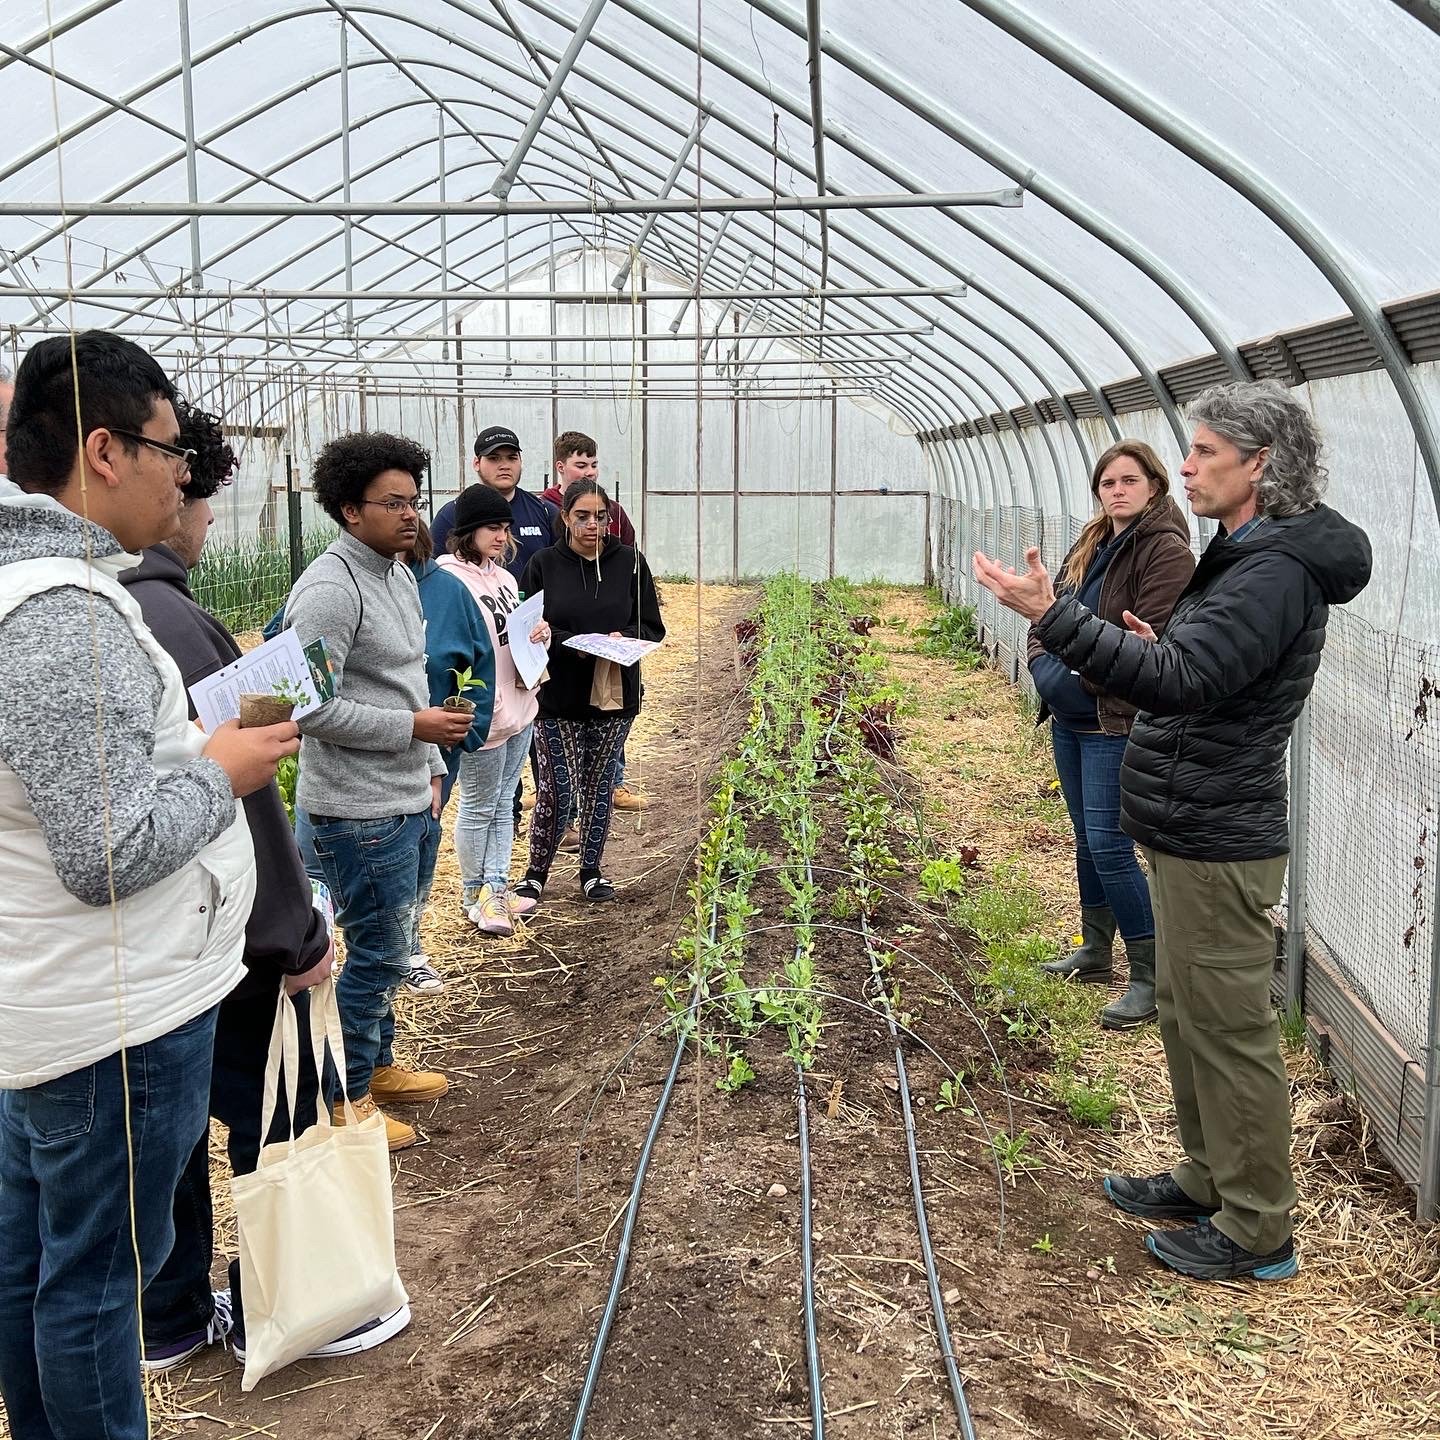 Junior high and high school students took a tour at SUNY Sullivan, learning about its sustainability practices.